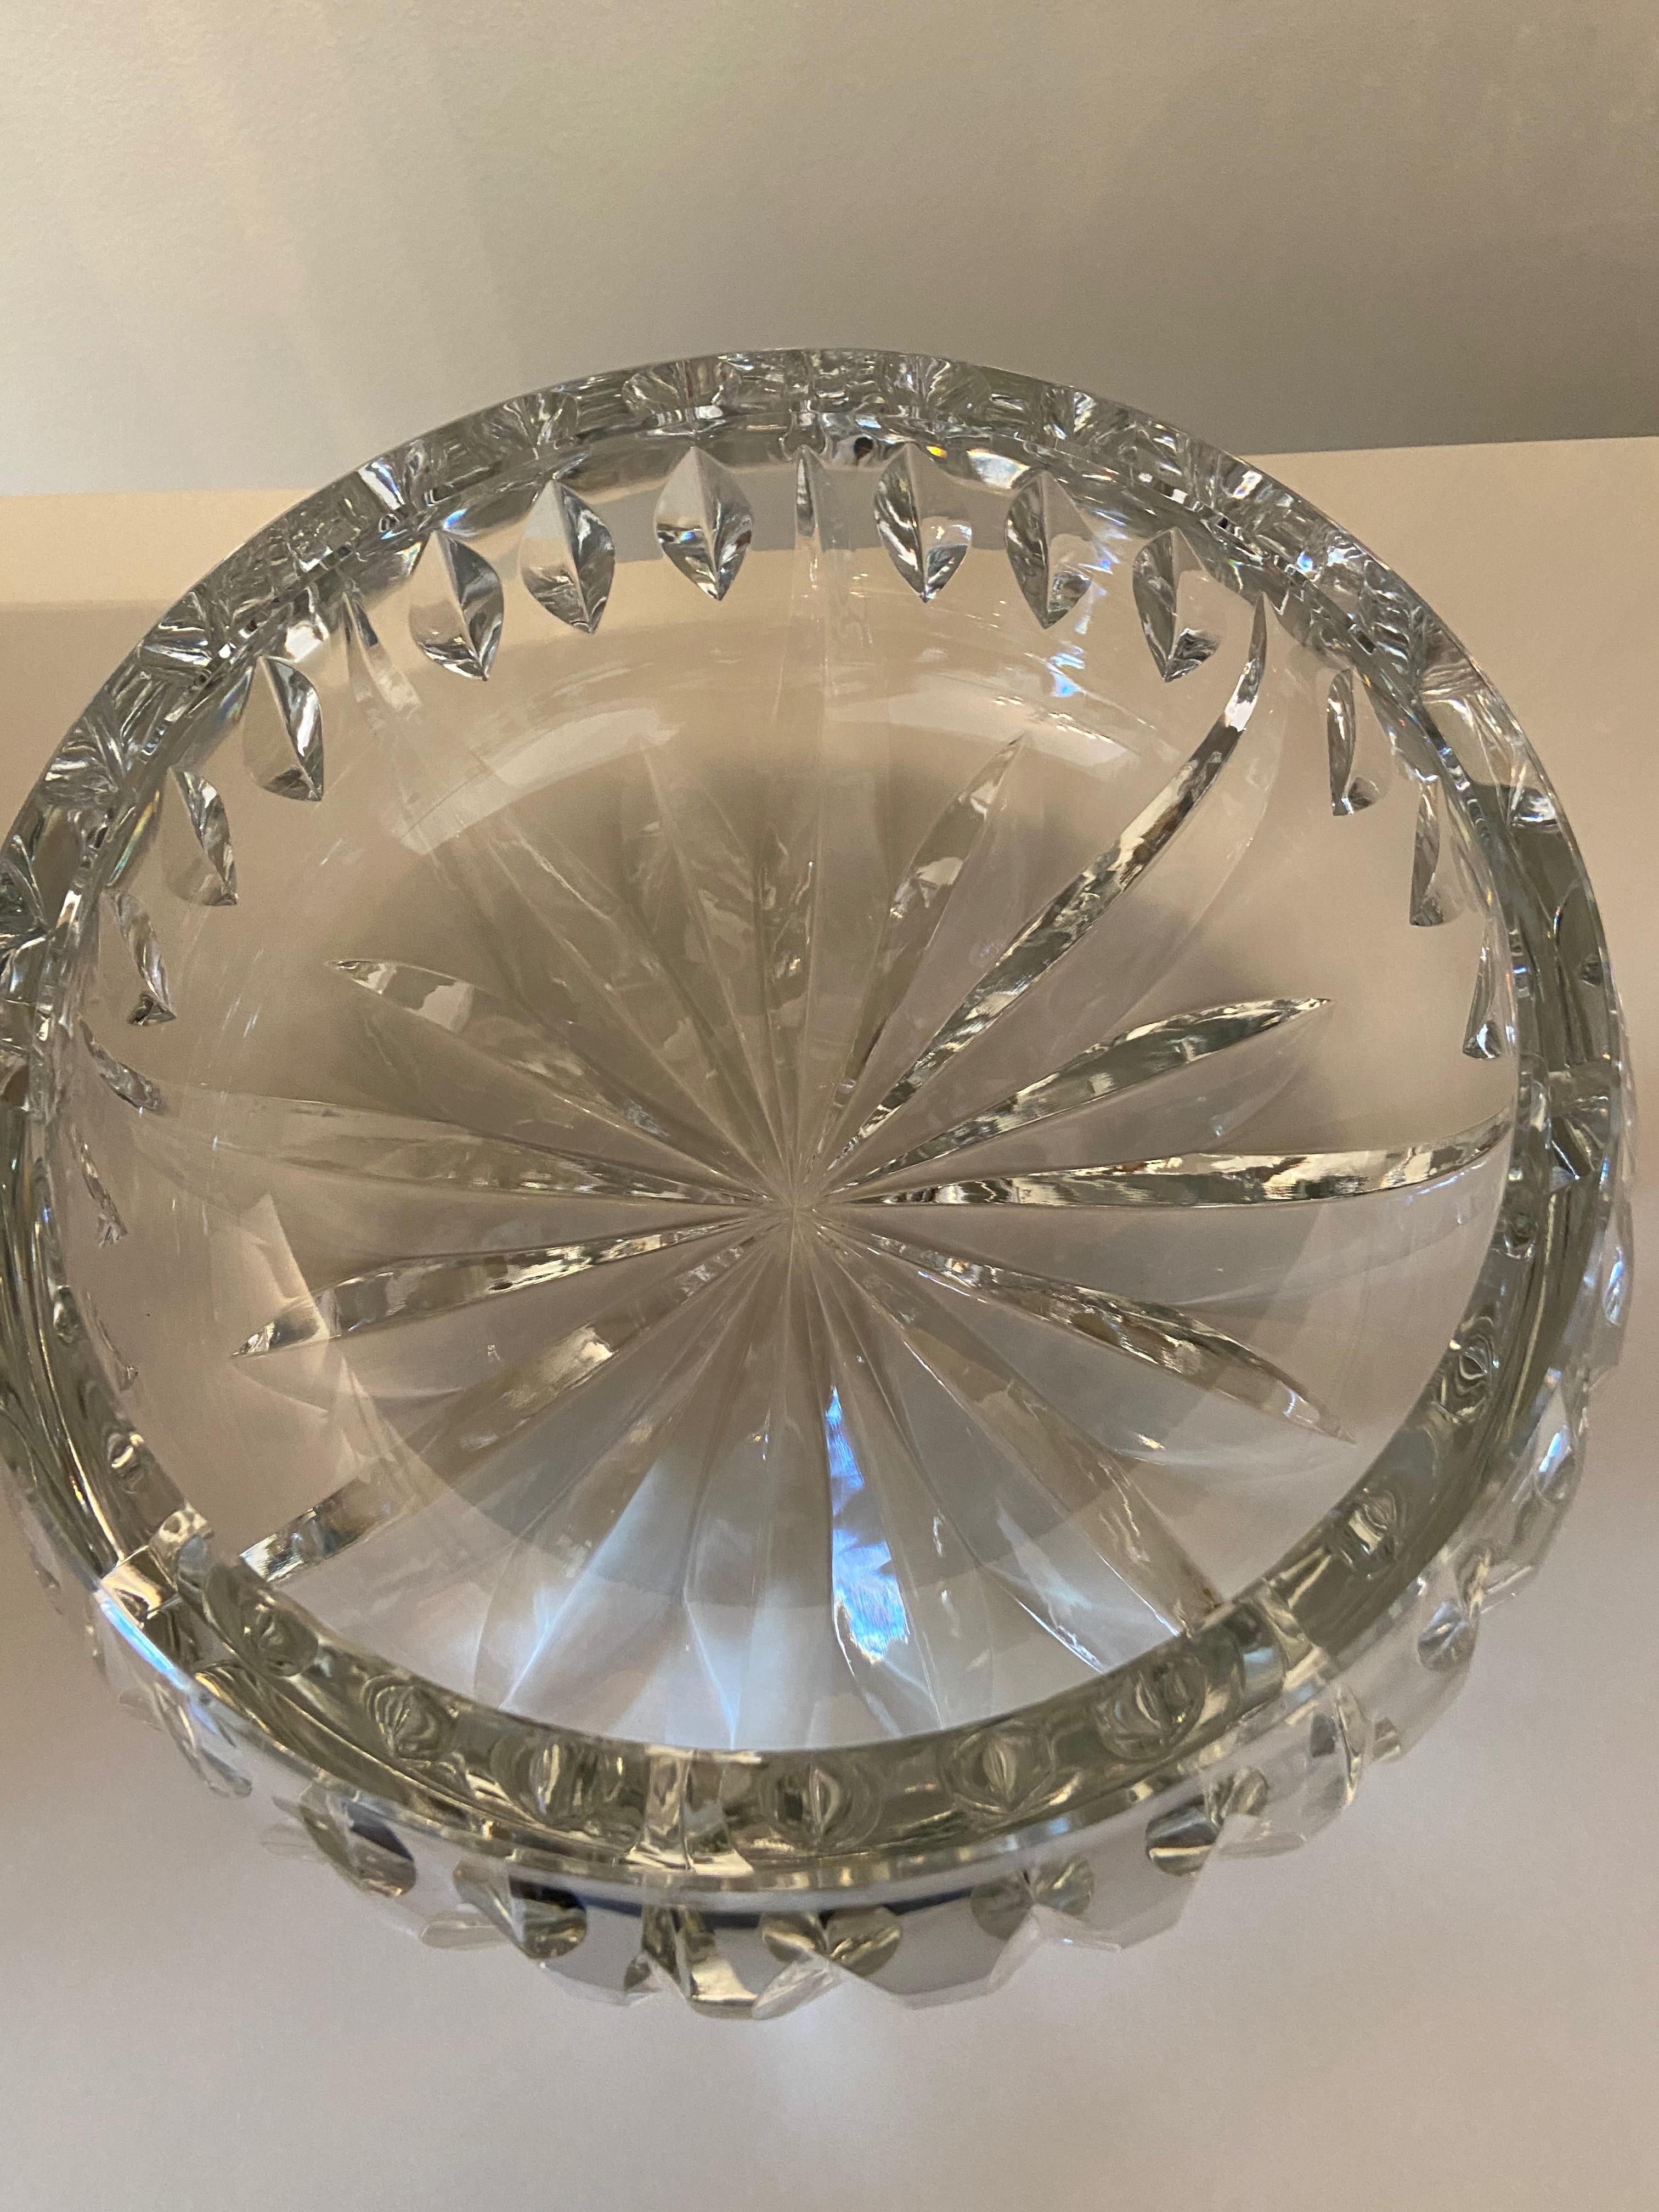 Carved Mid Century, Crystal Fruit Bowl from Saint Louis Manufacture, Original Box For Sale